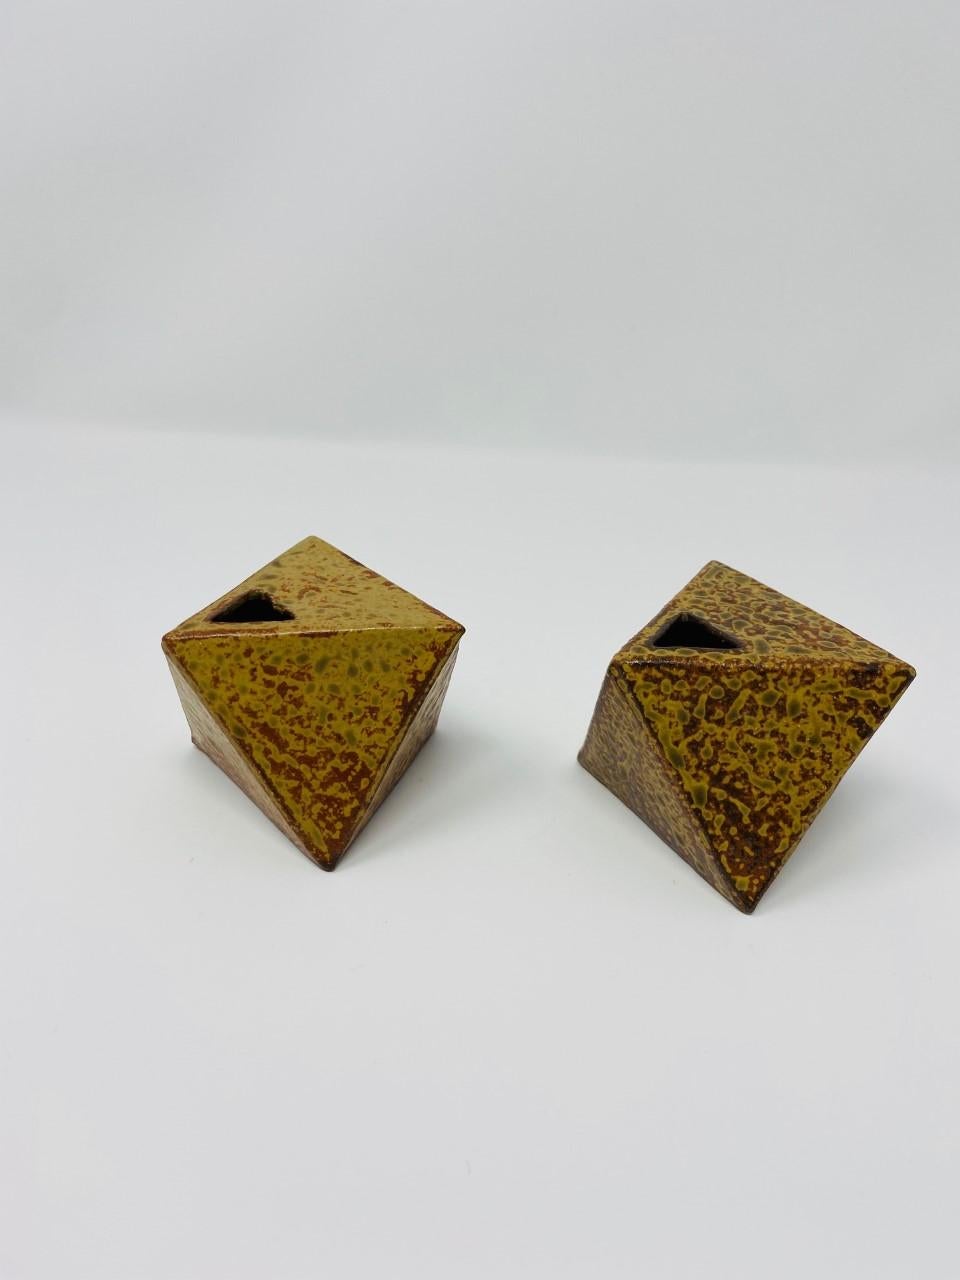 Alluring pair of Japanese hexagon ceramic bud vases/vessels. Modernist and striking, these ceramic pieces present an organic patina and texture which complements its sharp lines. Beautiful paired together or on their own. These pieces are unsigned.